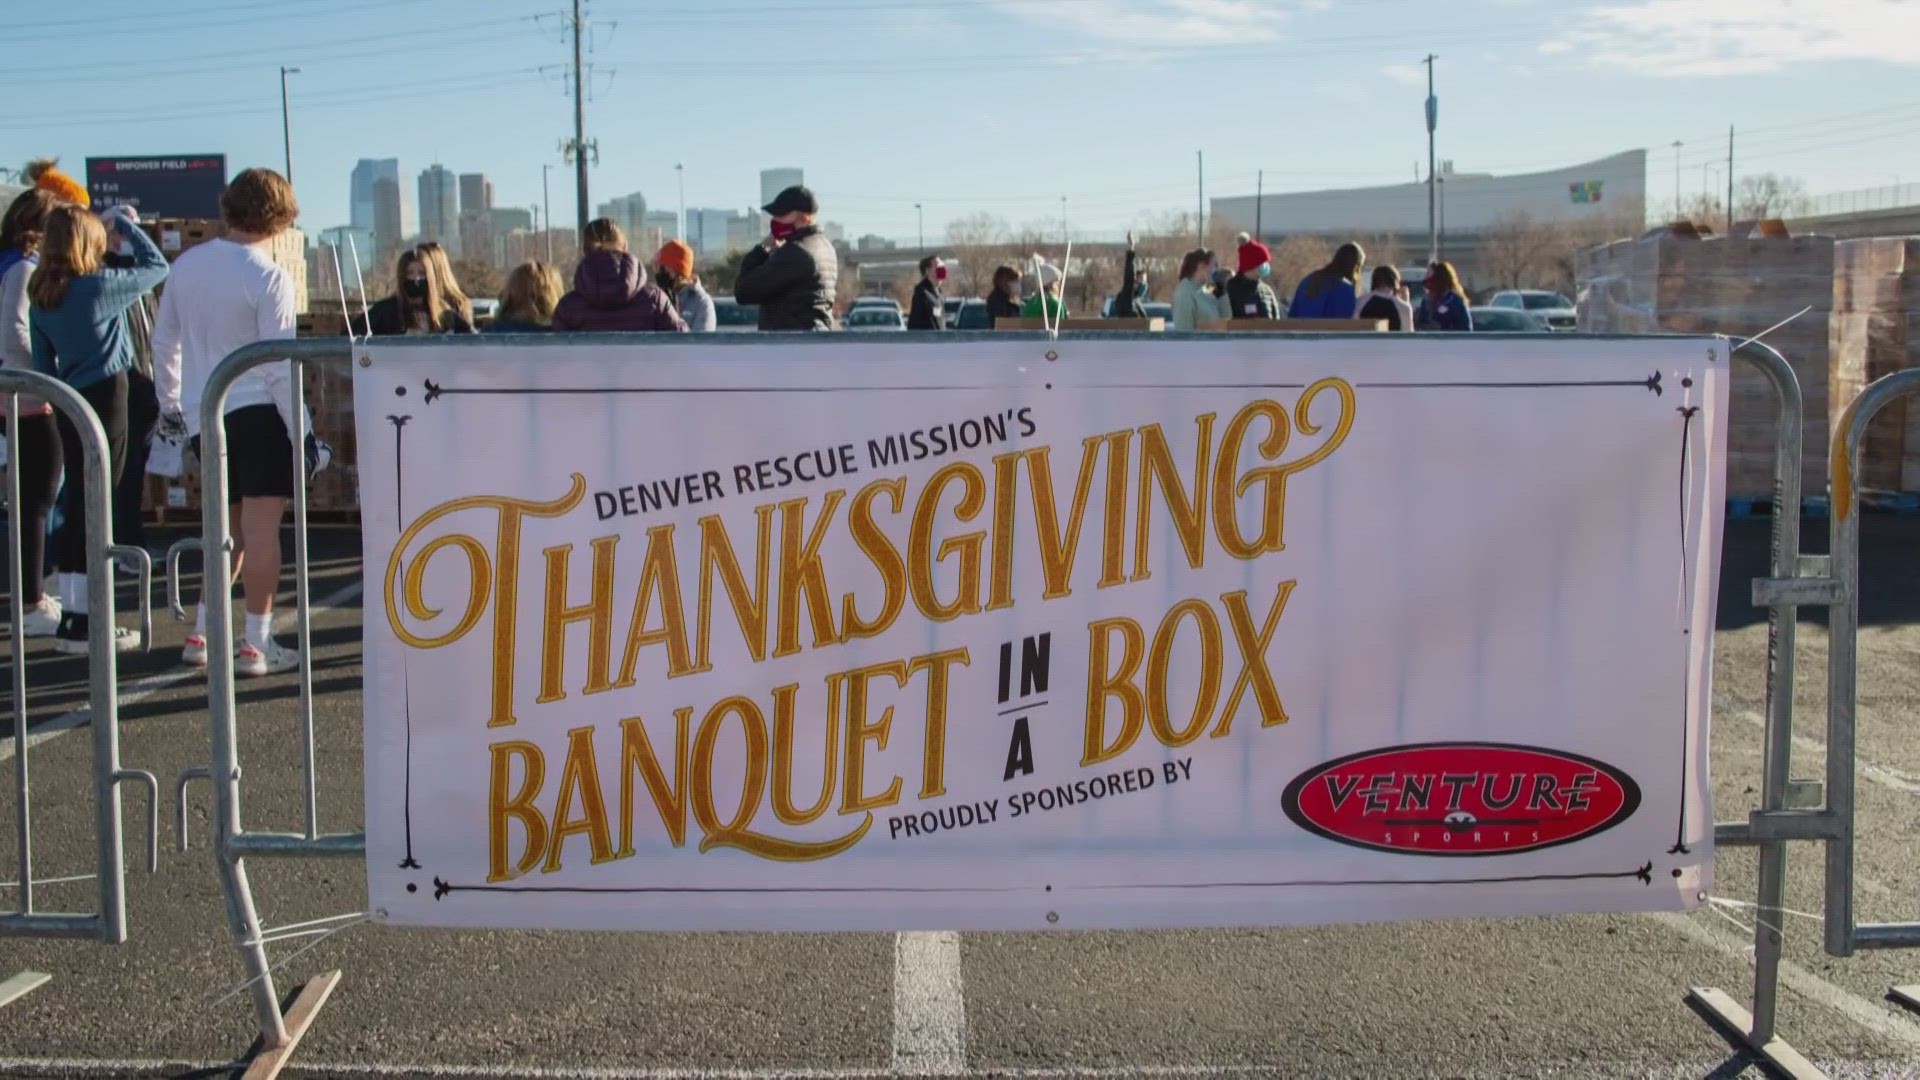 The Denver Rescue Mission's goal is to collect 15,000 turkeys between now and Nov. 23.